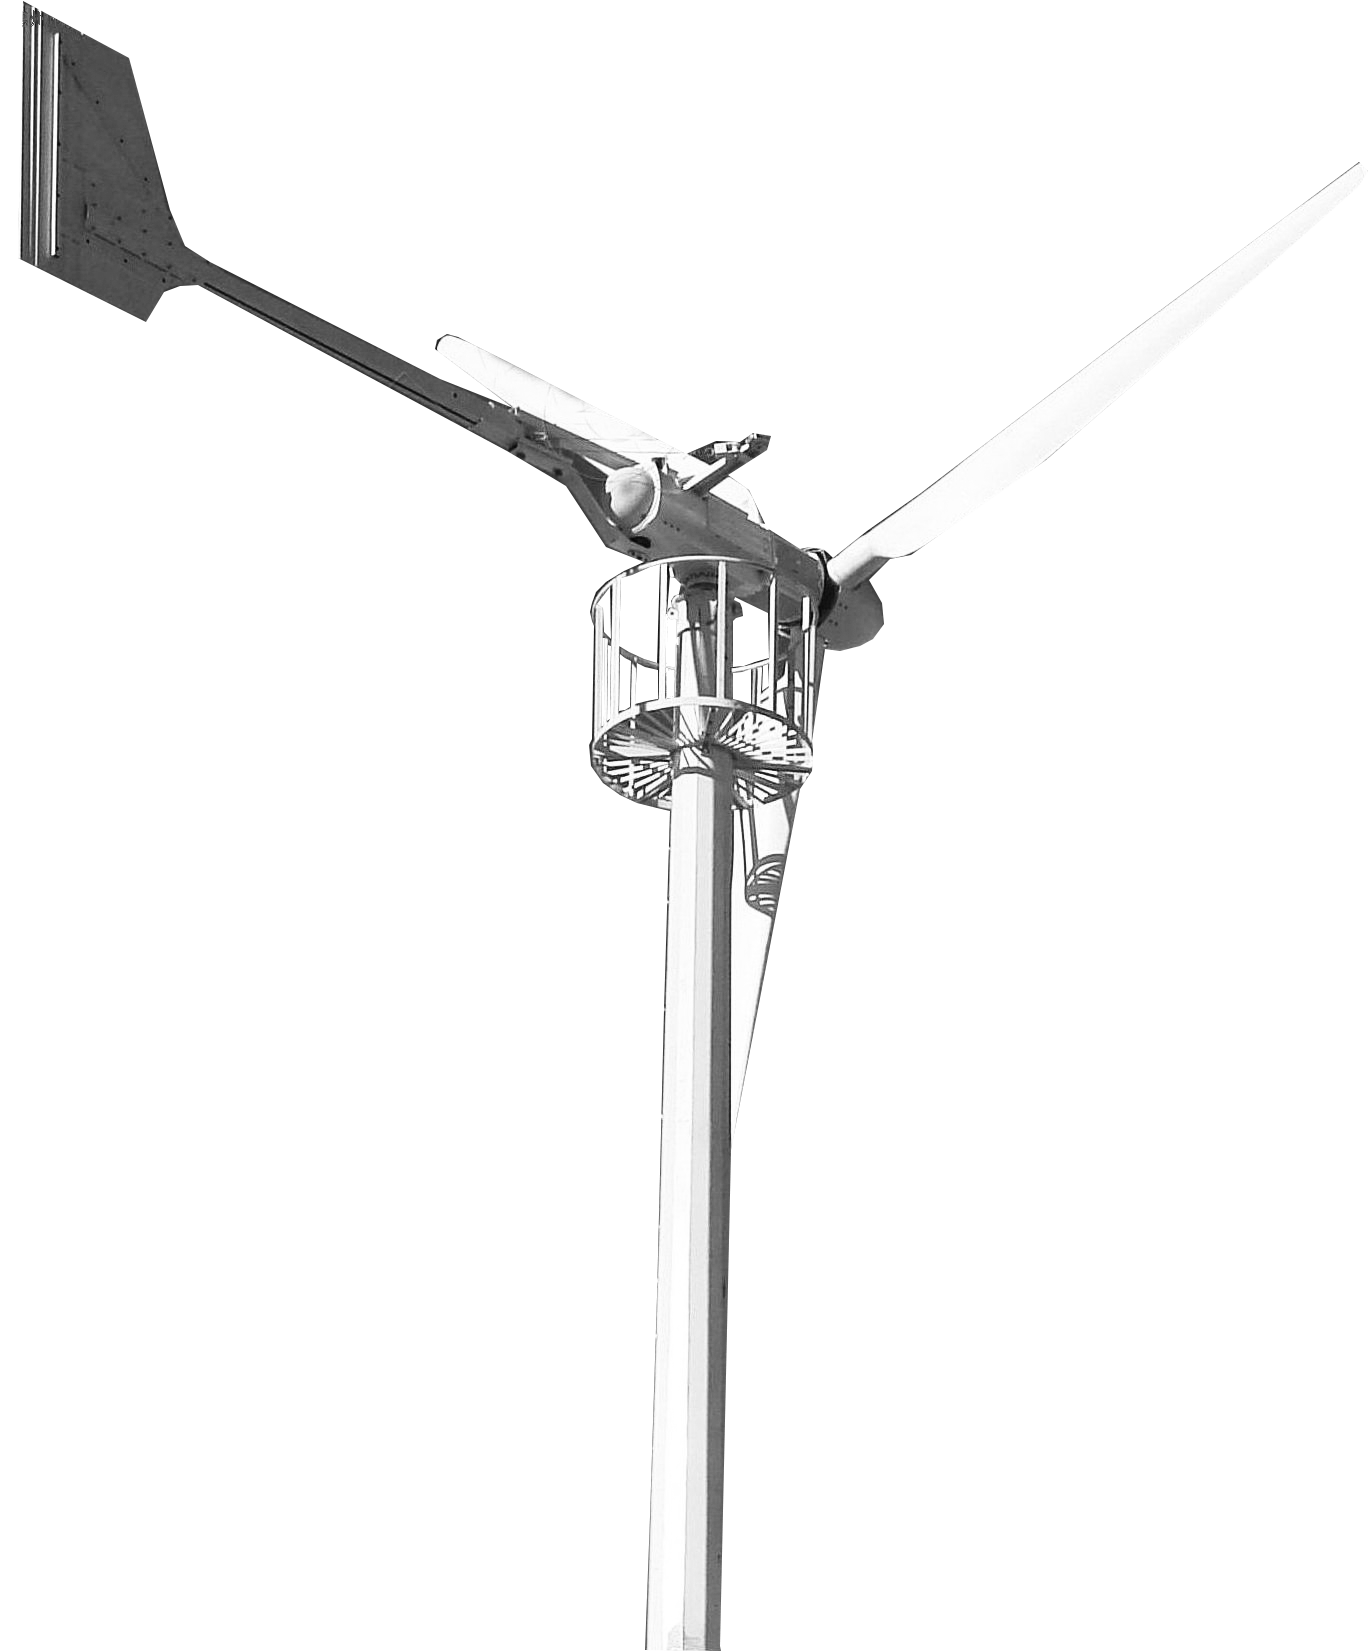 GH-20KW Horizontal Axis Wind Turbine Featured Image